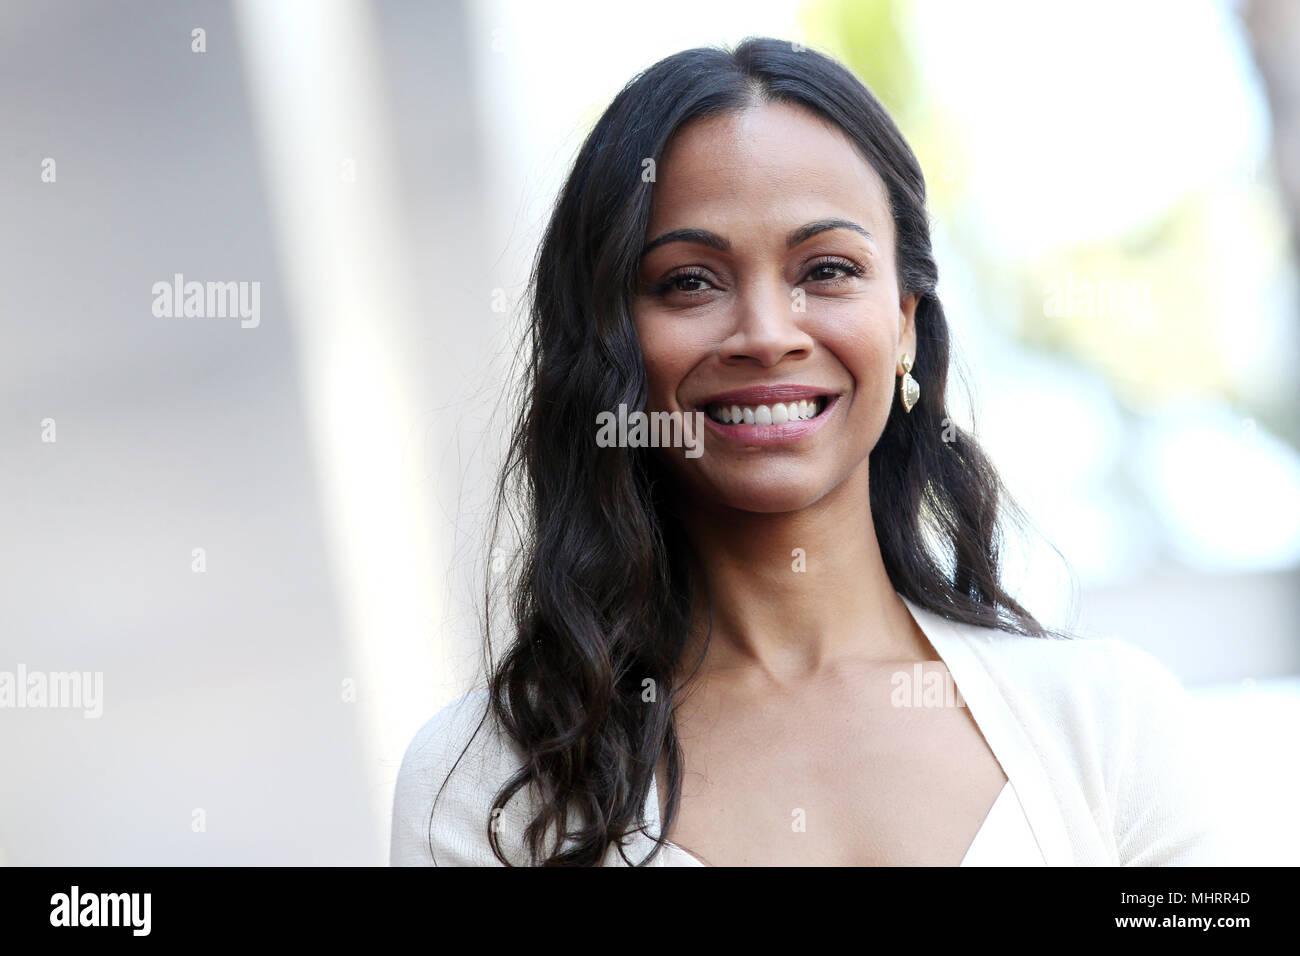 Hollywood, Ca. 3rd May, 2018. Zoe Saldana at the ceremony honoring actress Zoe Saldana with a star on Hollywood Walk Of Fame in Hollywood, California on May 3, 2018. Credit: Faye Sadou/Media Punch/Alamy Live News Stock Photo